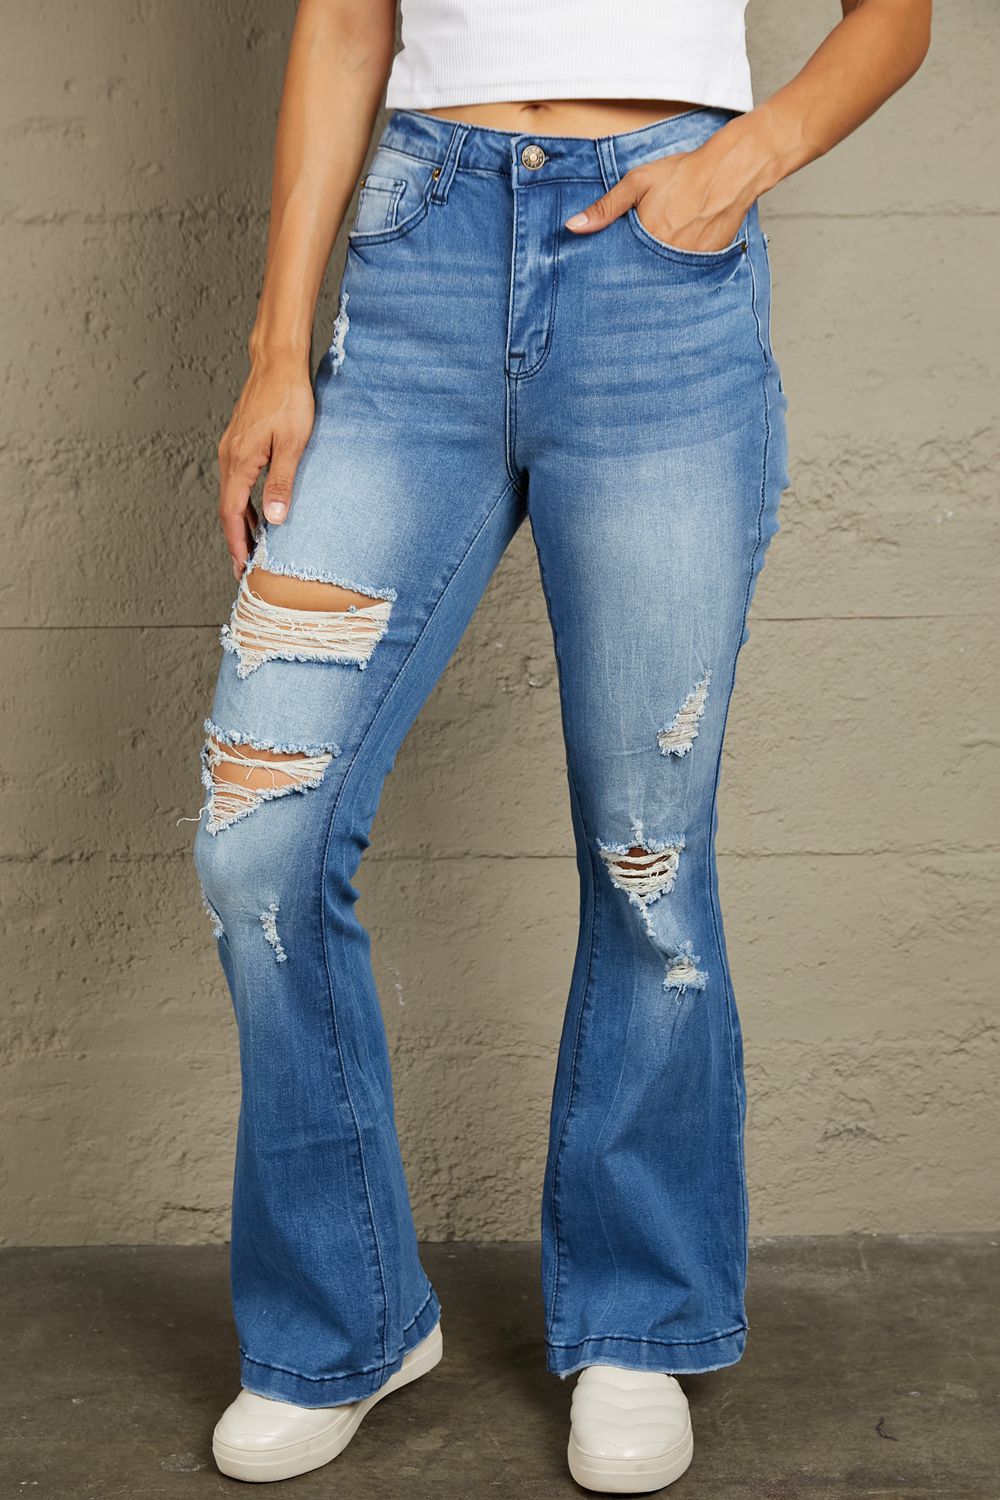 Distressed Flare Leg Jeans with Pockets - Medium / S - Bottoms - Pants - 1 - 2024